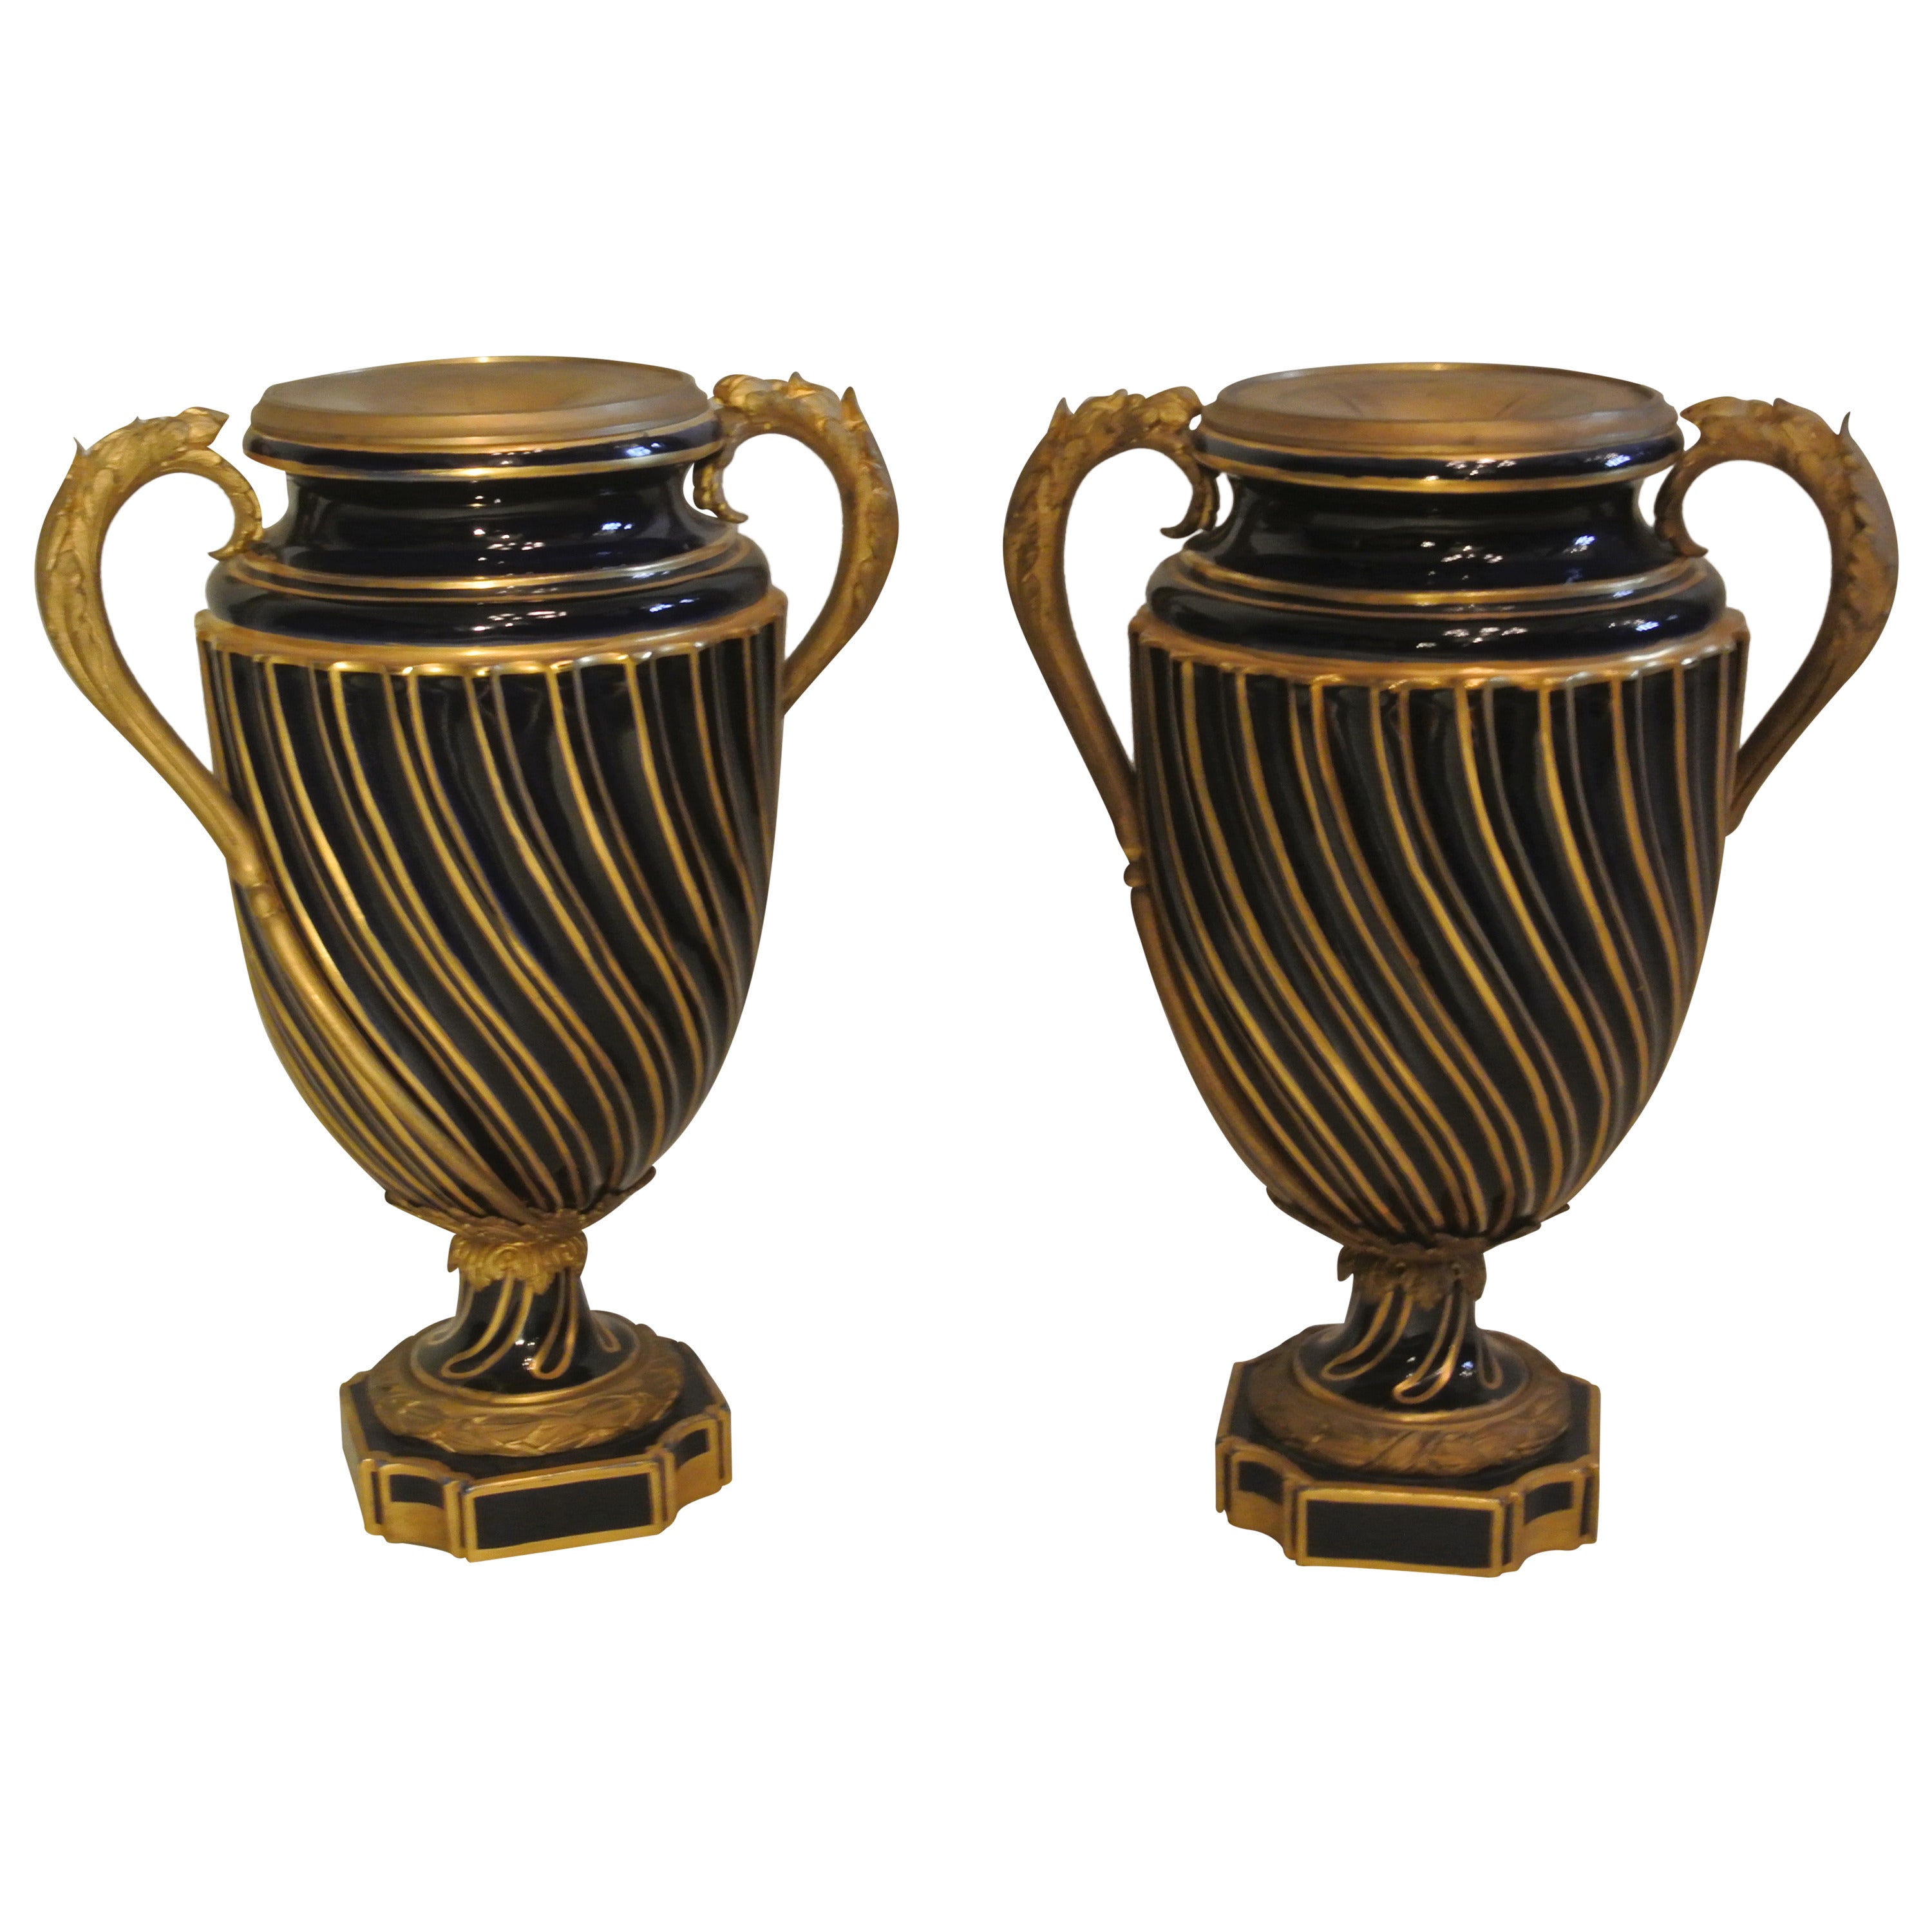 Pair of Vases Sèvres, Mounts Anses and Gilt Bronze